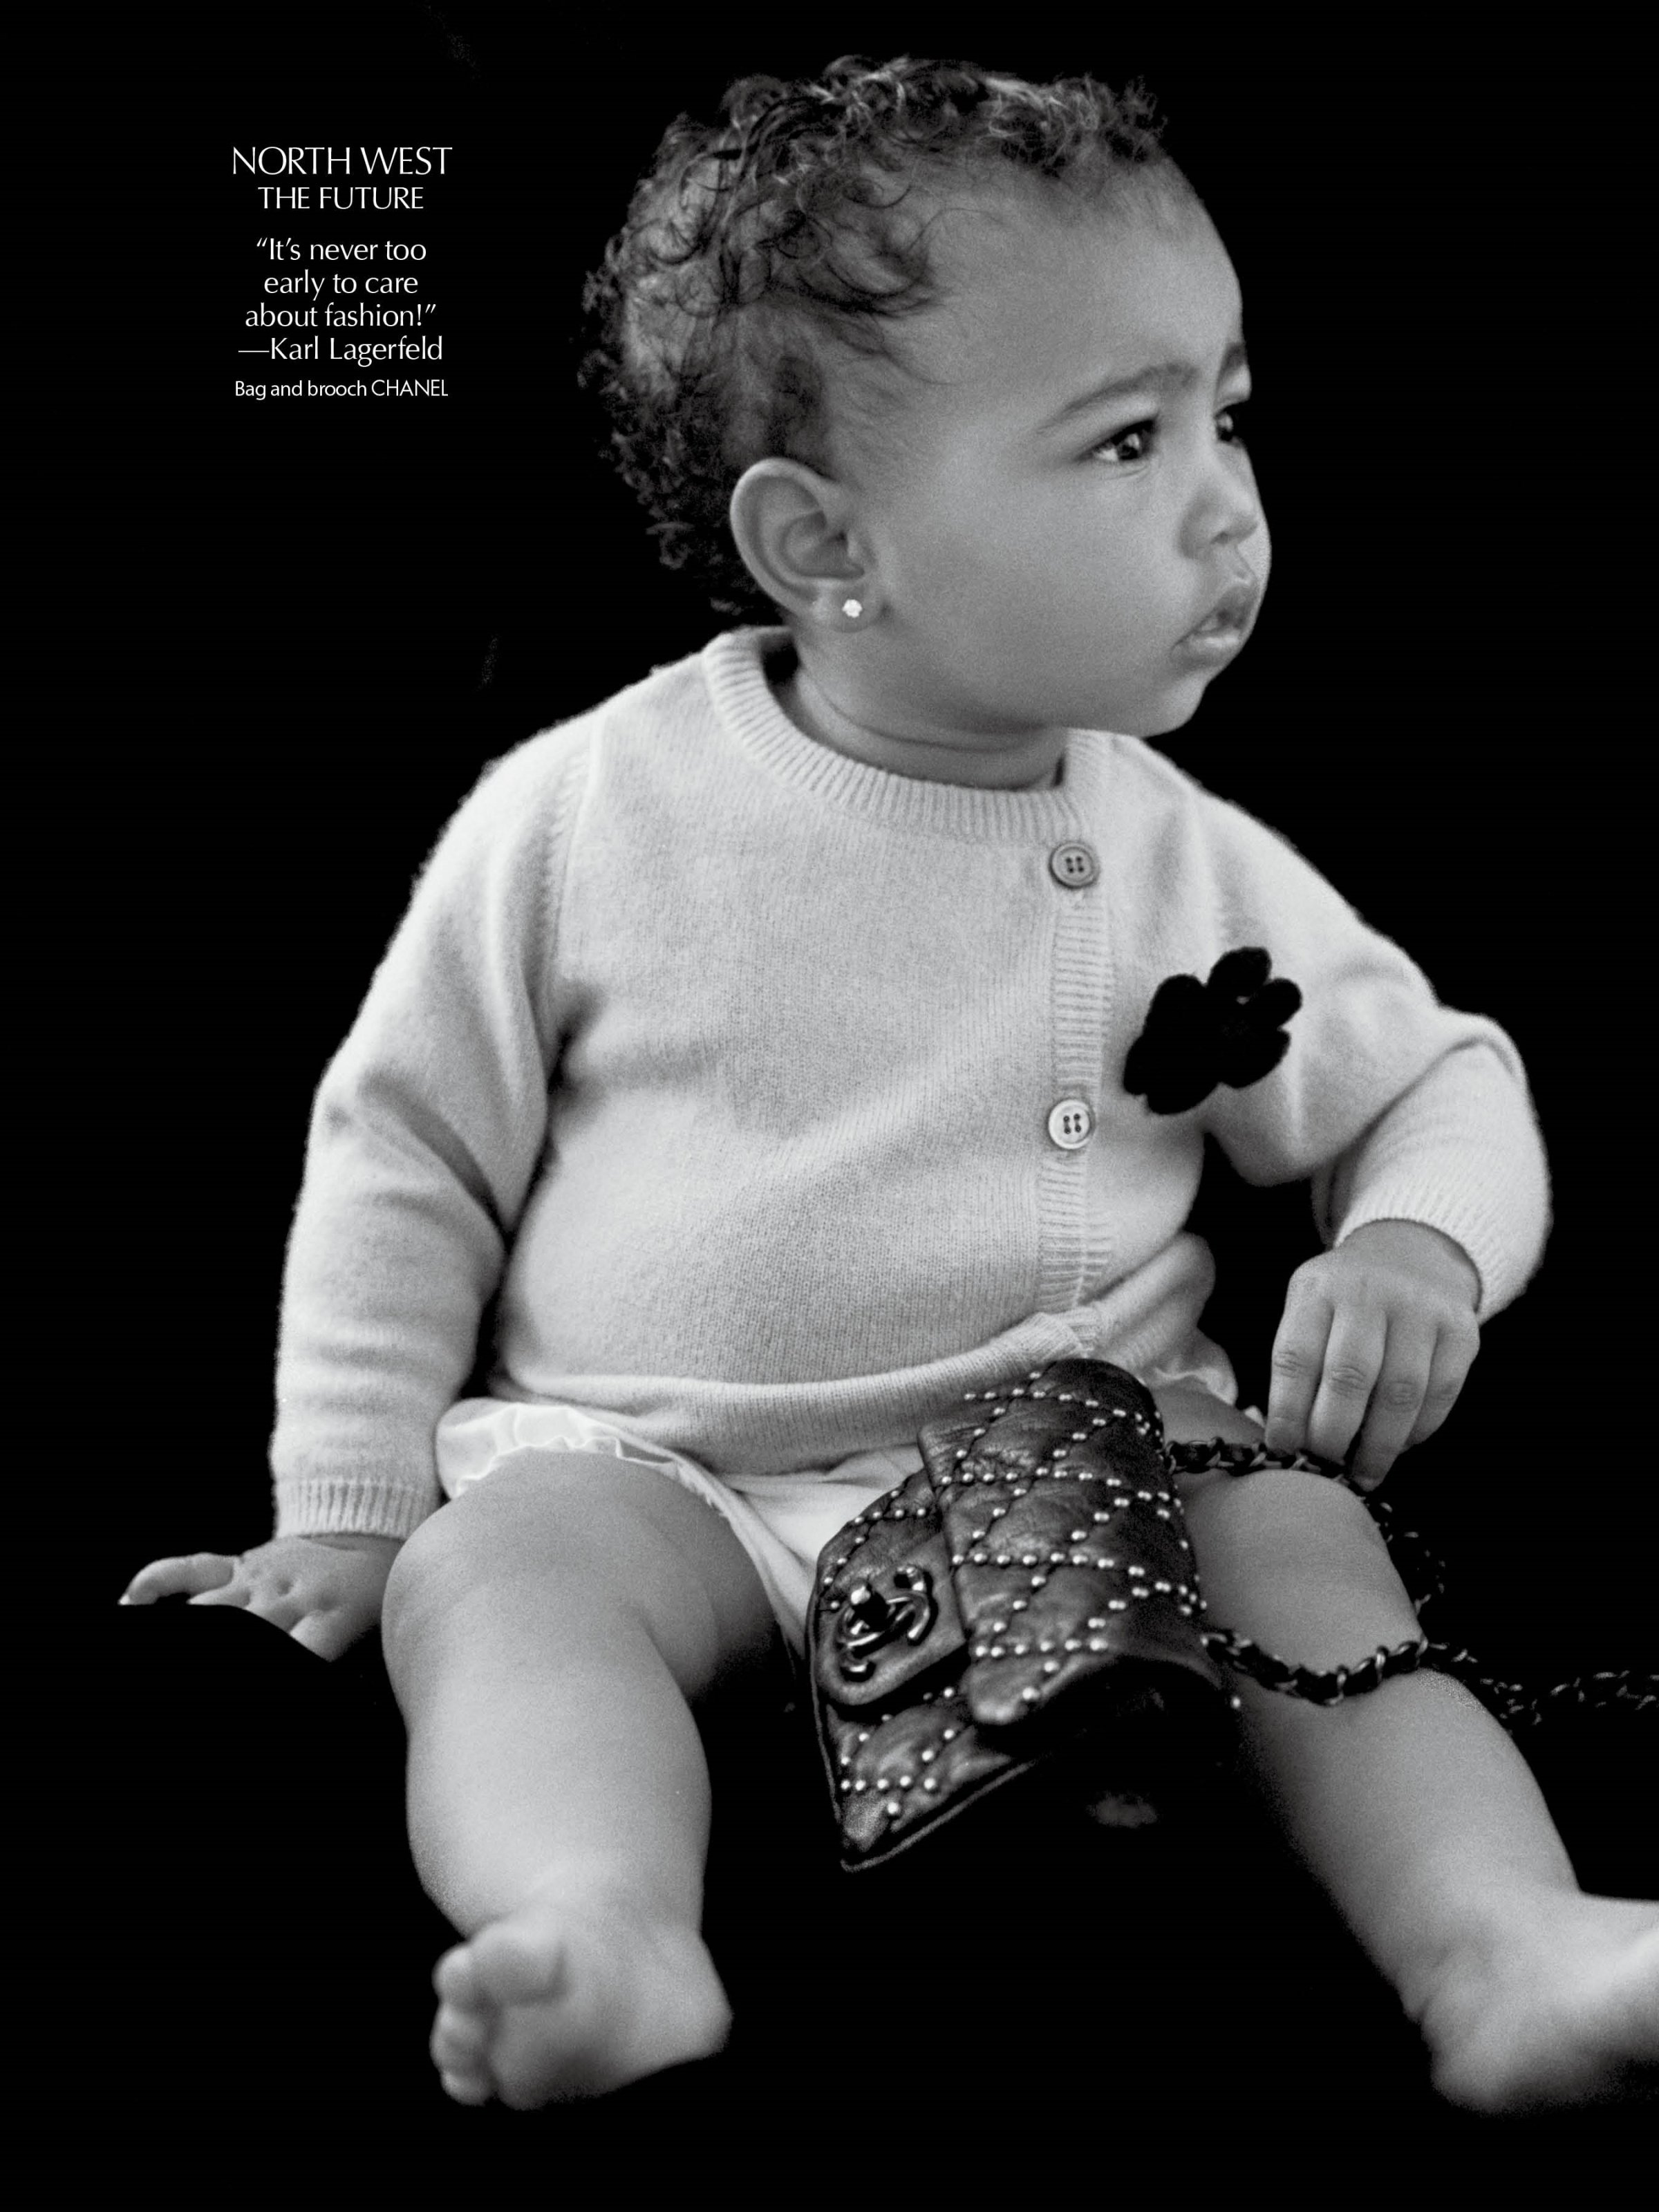 Baby North West makes her modeling debut in he latest issue of CR Fashion Book.